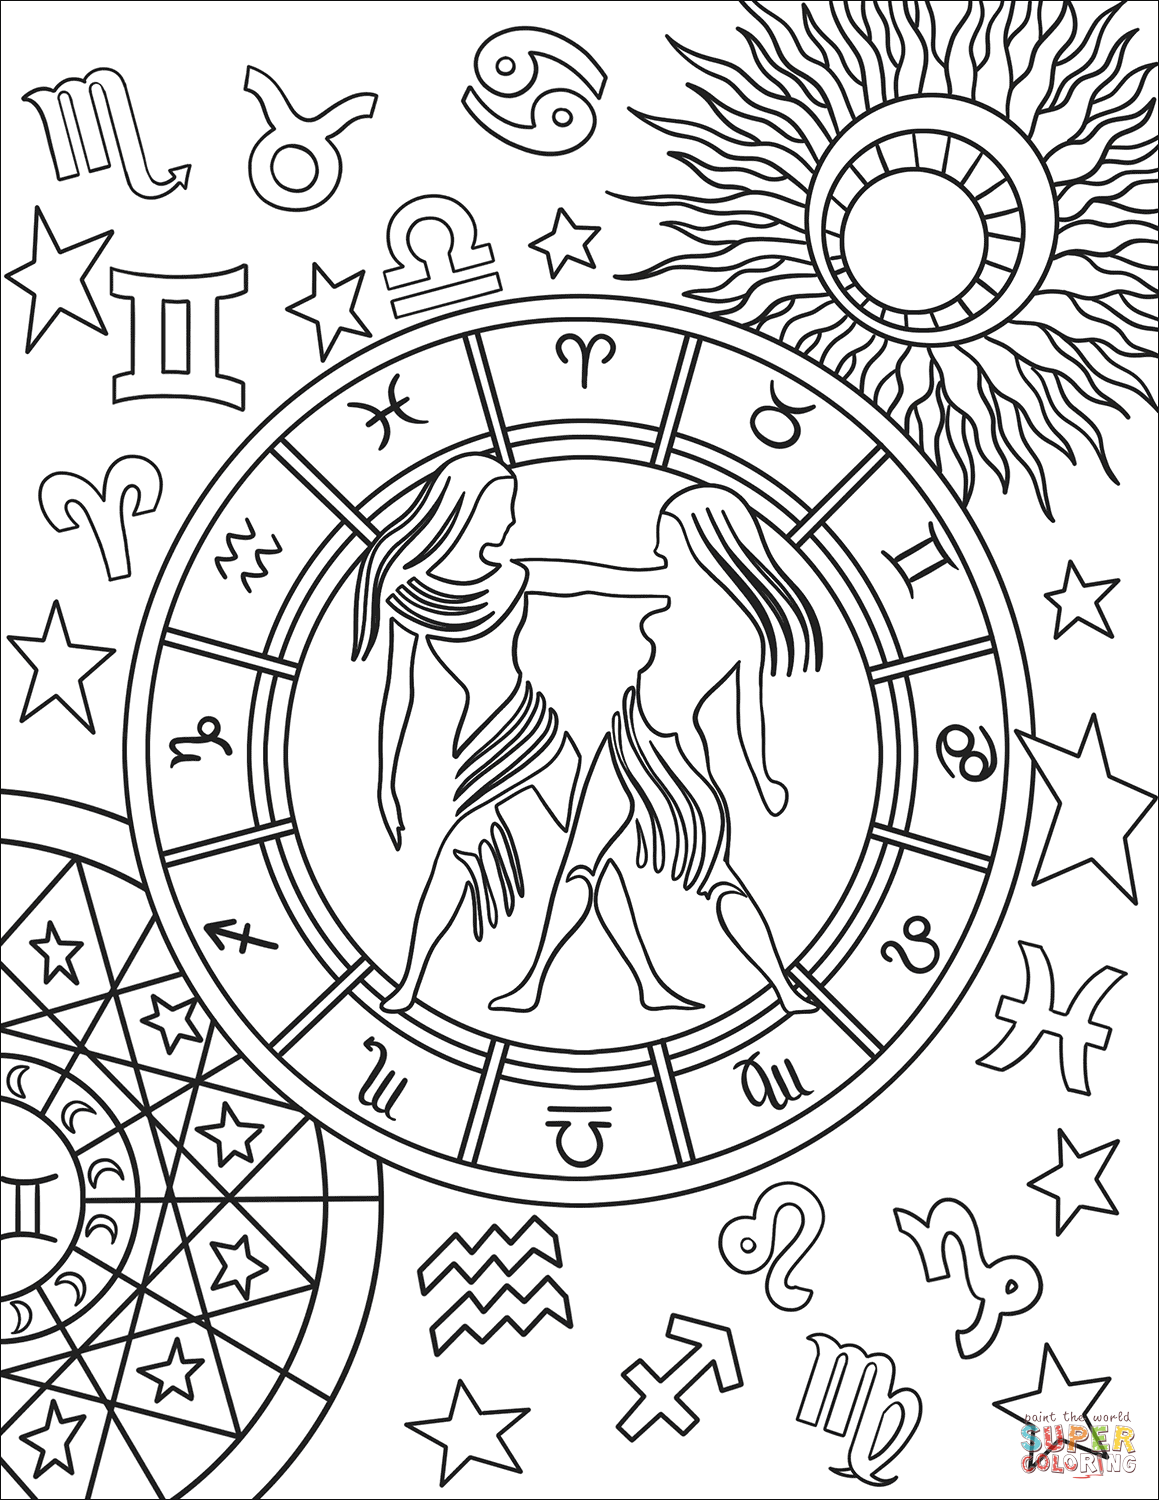 Zodiac Coloring Pages for Adults